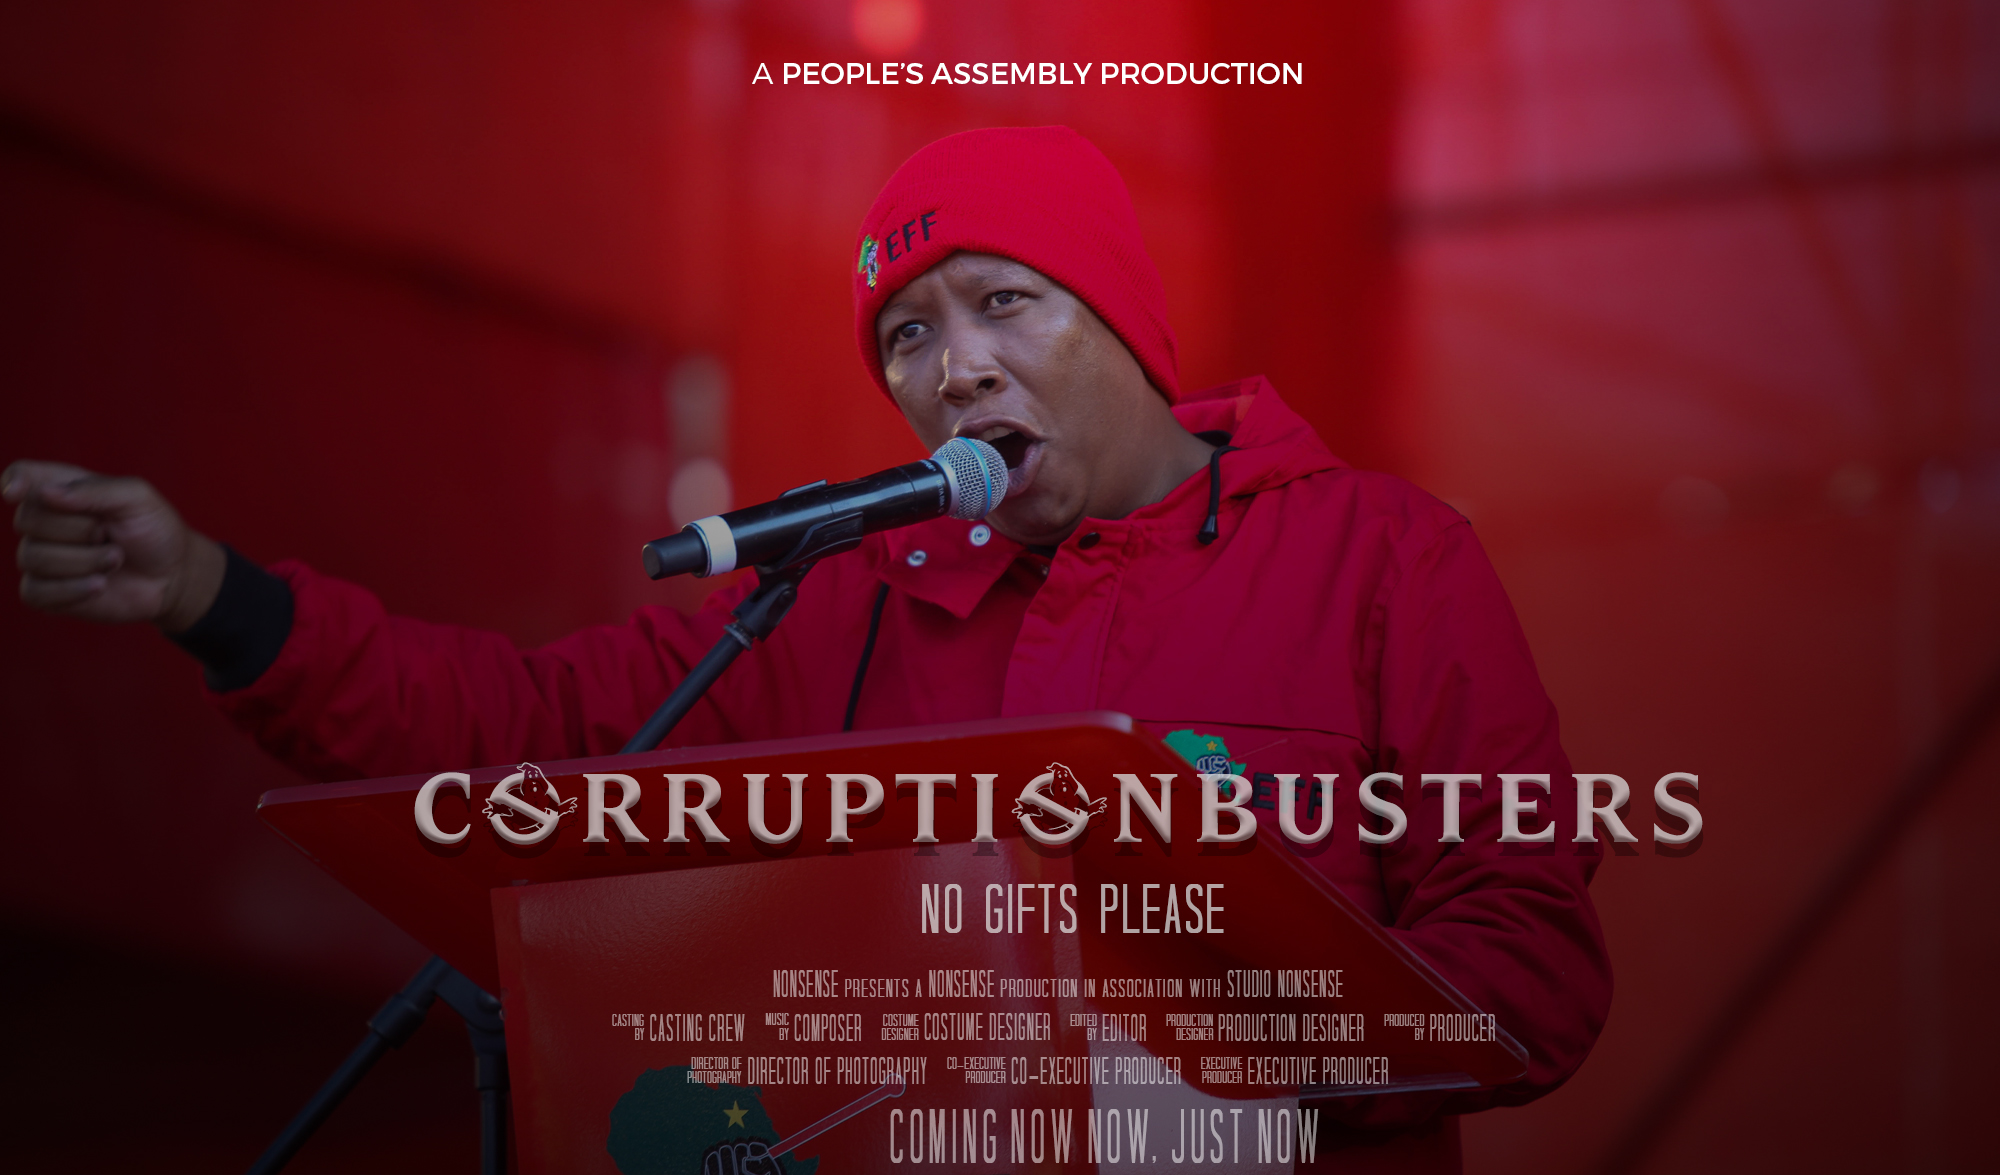 Julius Malema, the corruption buster